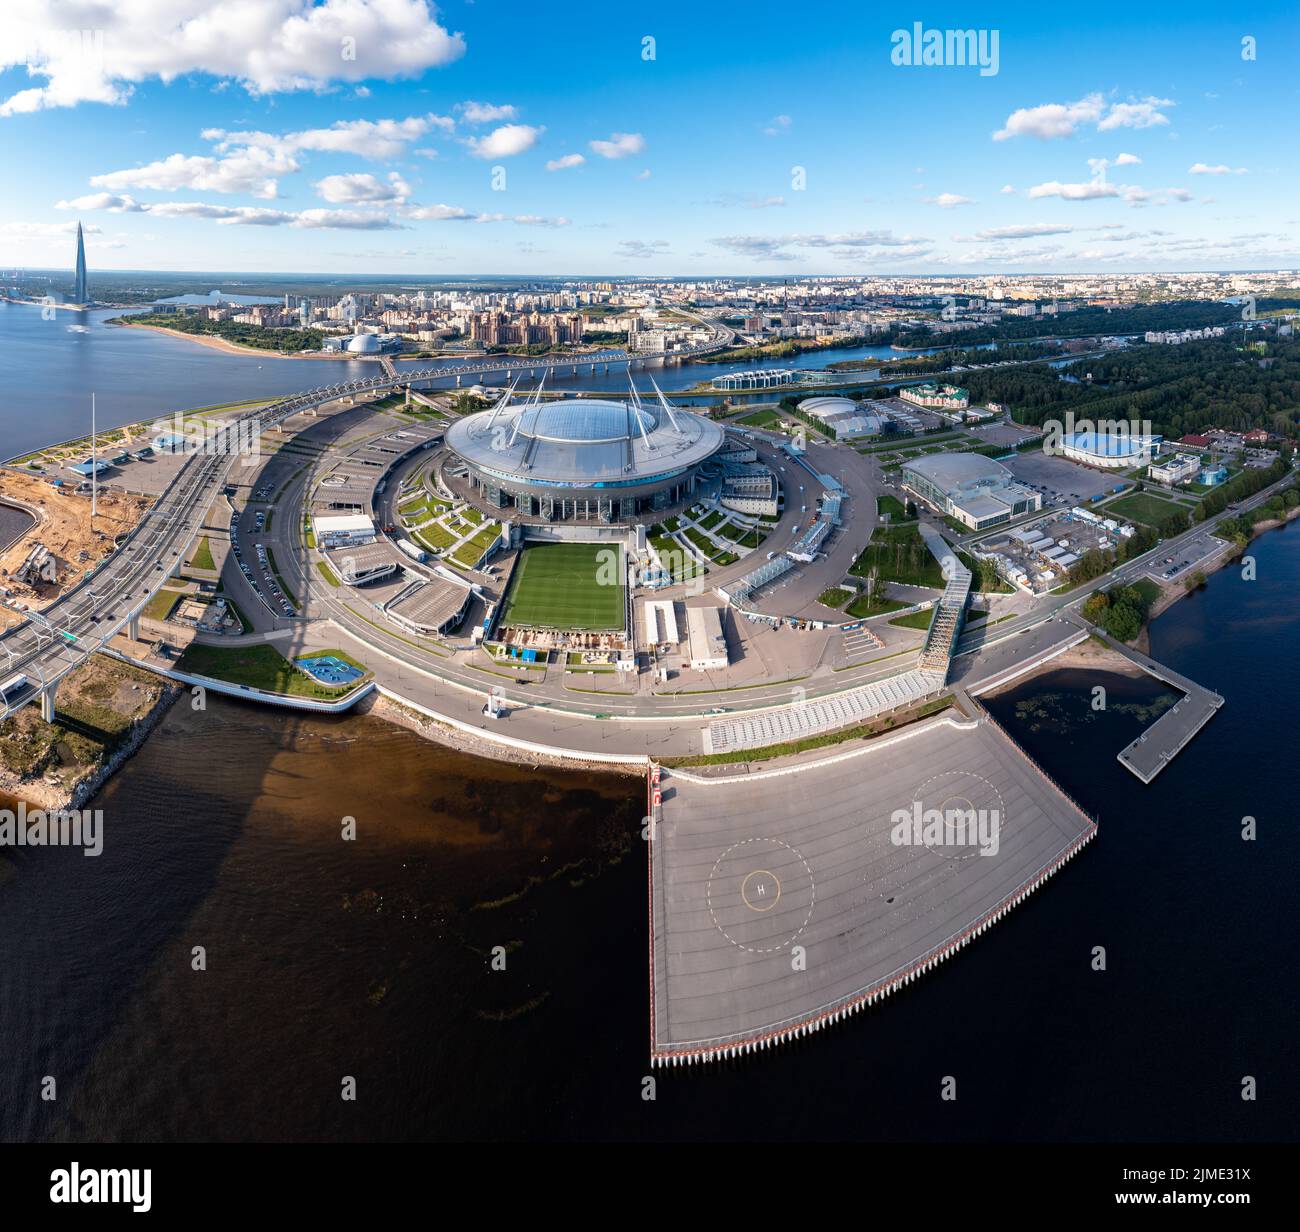 Russia, St.Petersburg, 01 September 2020: Drone point of view of new stadium Gazprom Arena, Euro 2020, retractable soccer field, Stock Photo